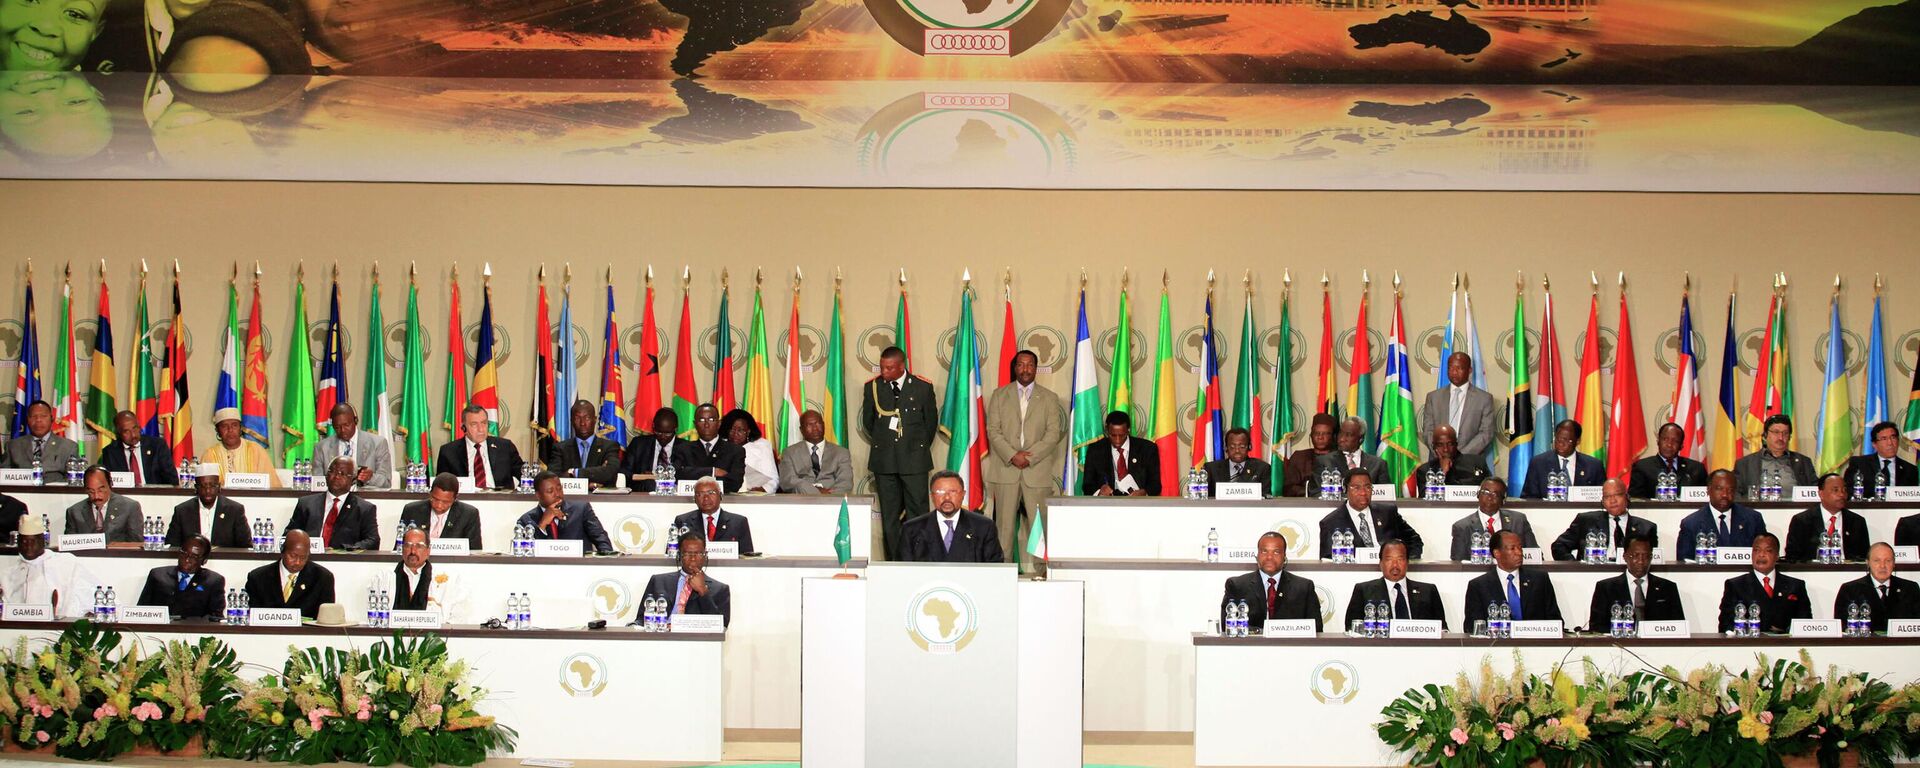 African heads of state and country representatives listen as African Union Commission Chairman Jean Ping speaks during the opening session of the 17th African Union Summit, at Sipopo Conference Center, outside Malabo, Equatorial Guinea, Thursday, June 30, 2011. - Sputnik Africa, 1920, 09.09.2023